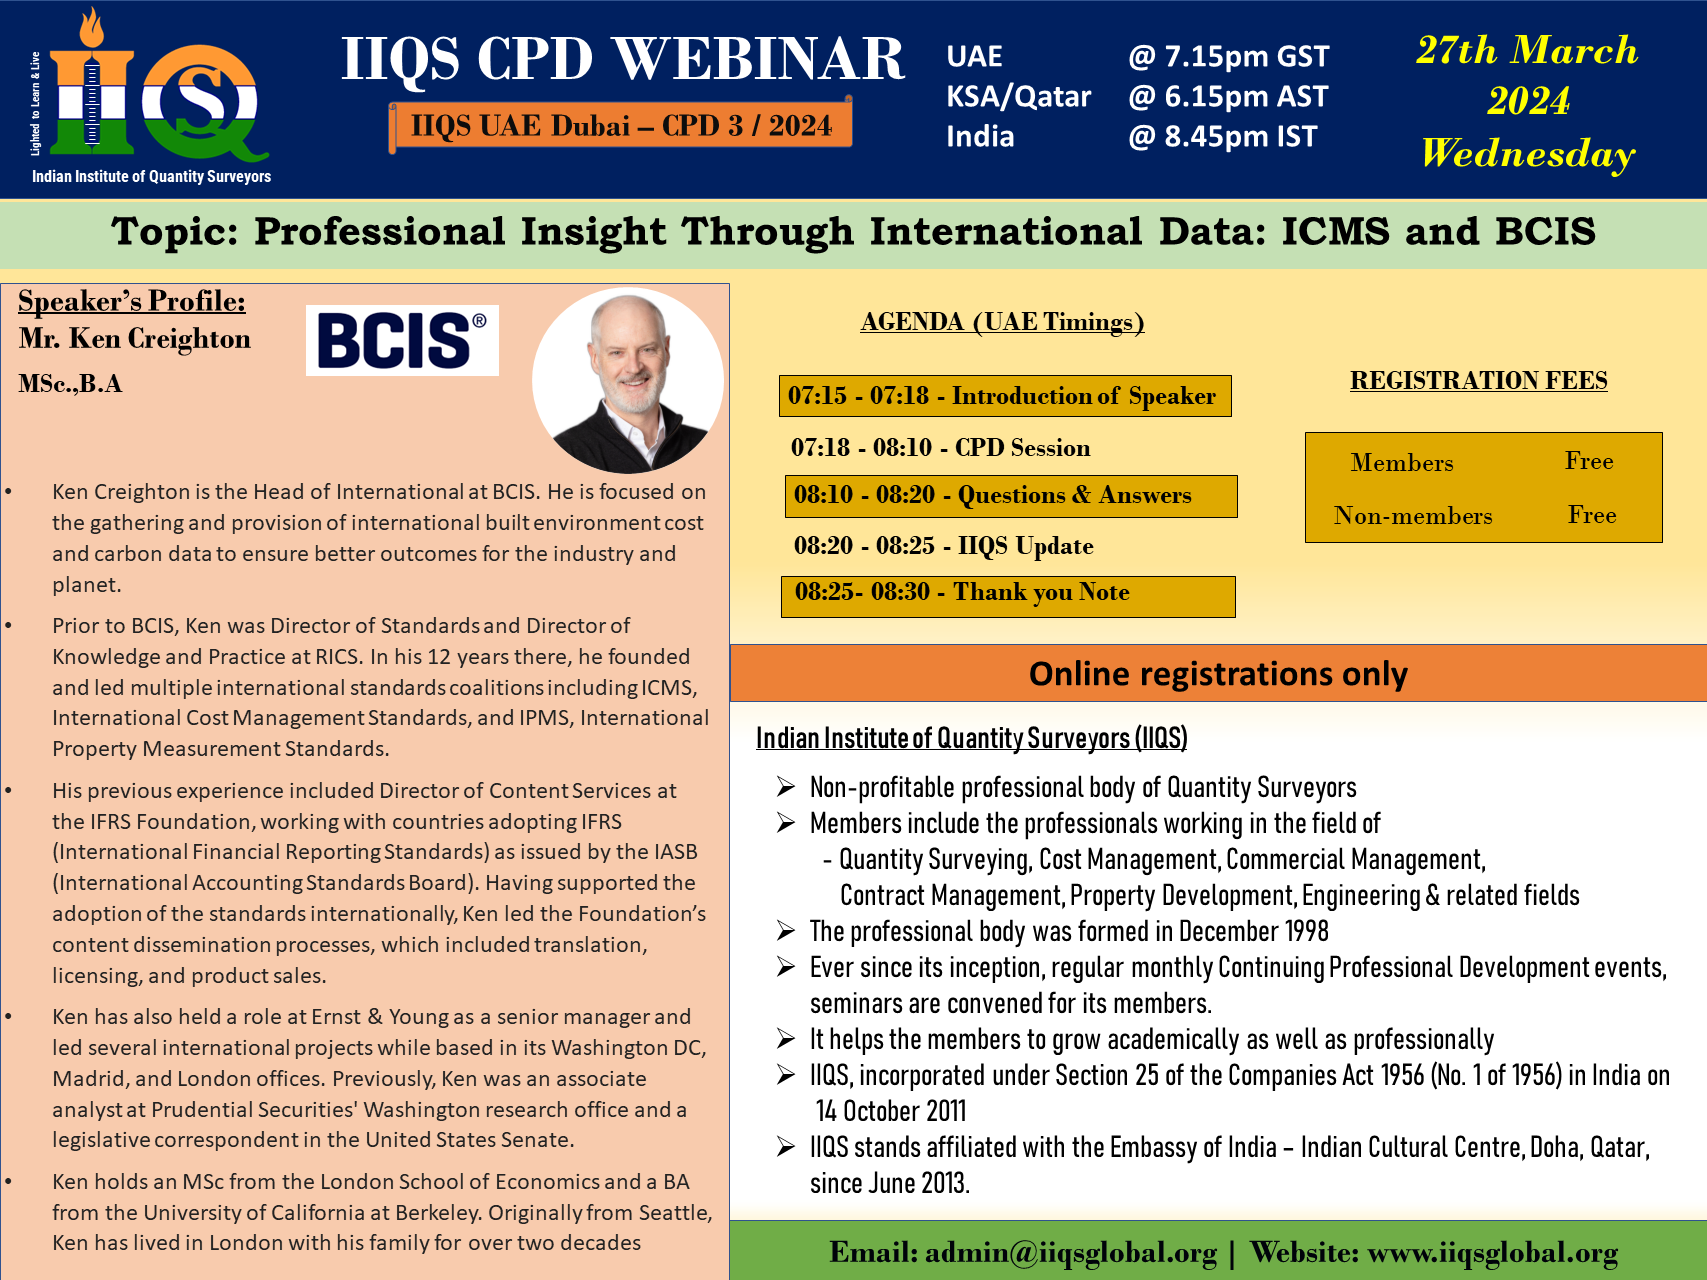 Professional Insight Through International Data: ICMS and BCIS